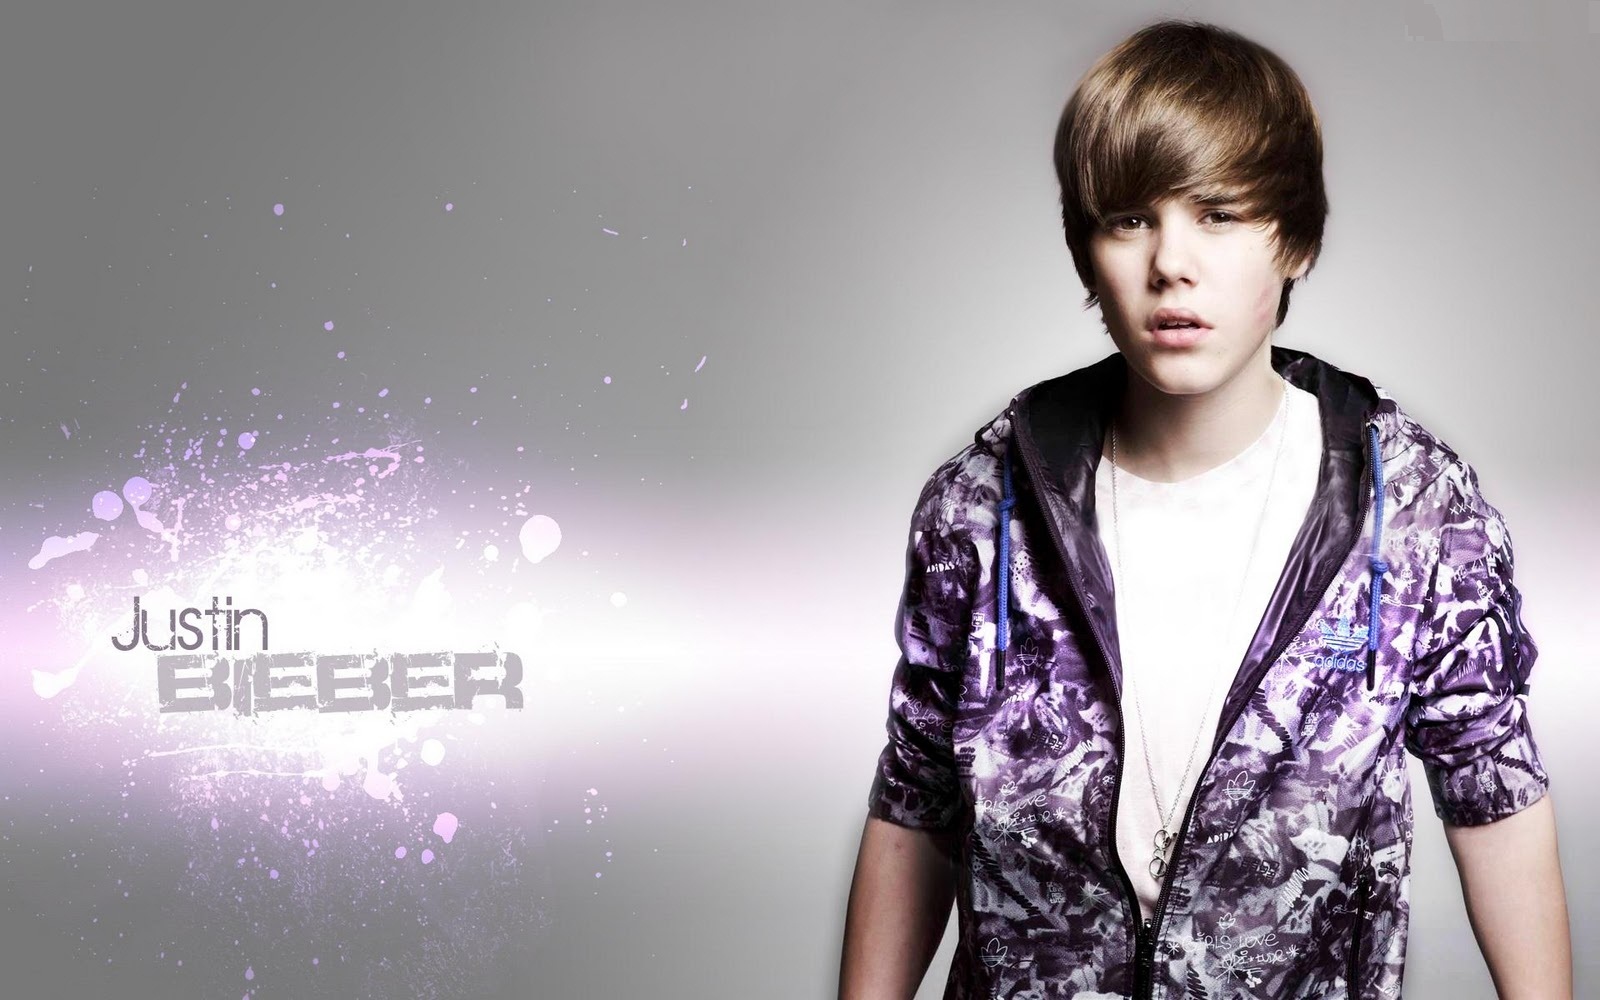 Justin Bieber New Wallpaper Pc Android iPhone And iPad